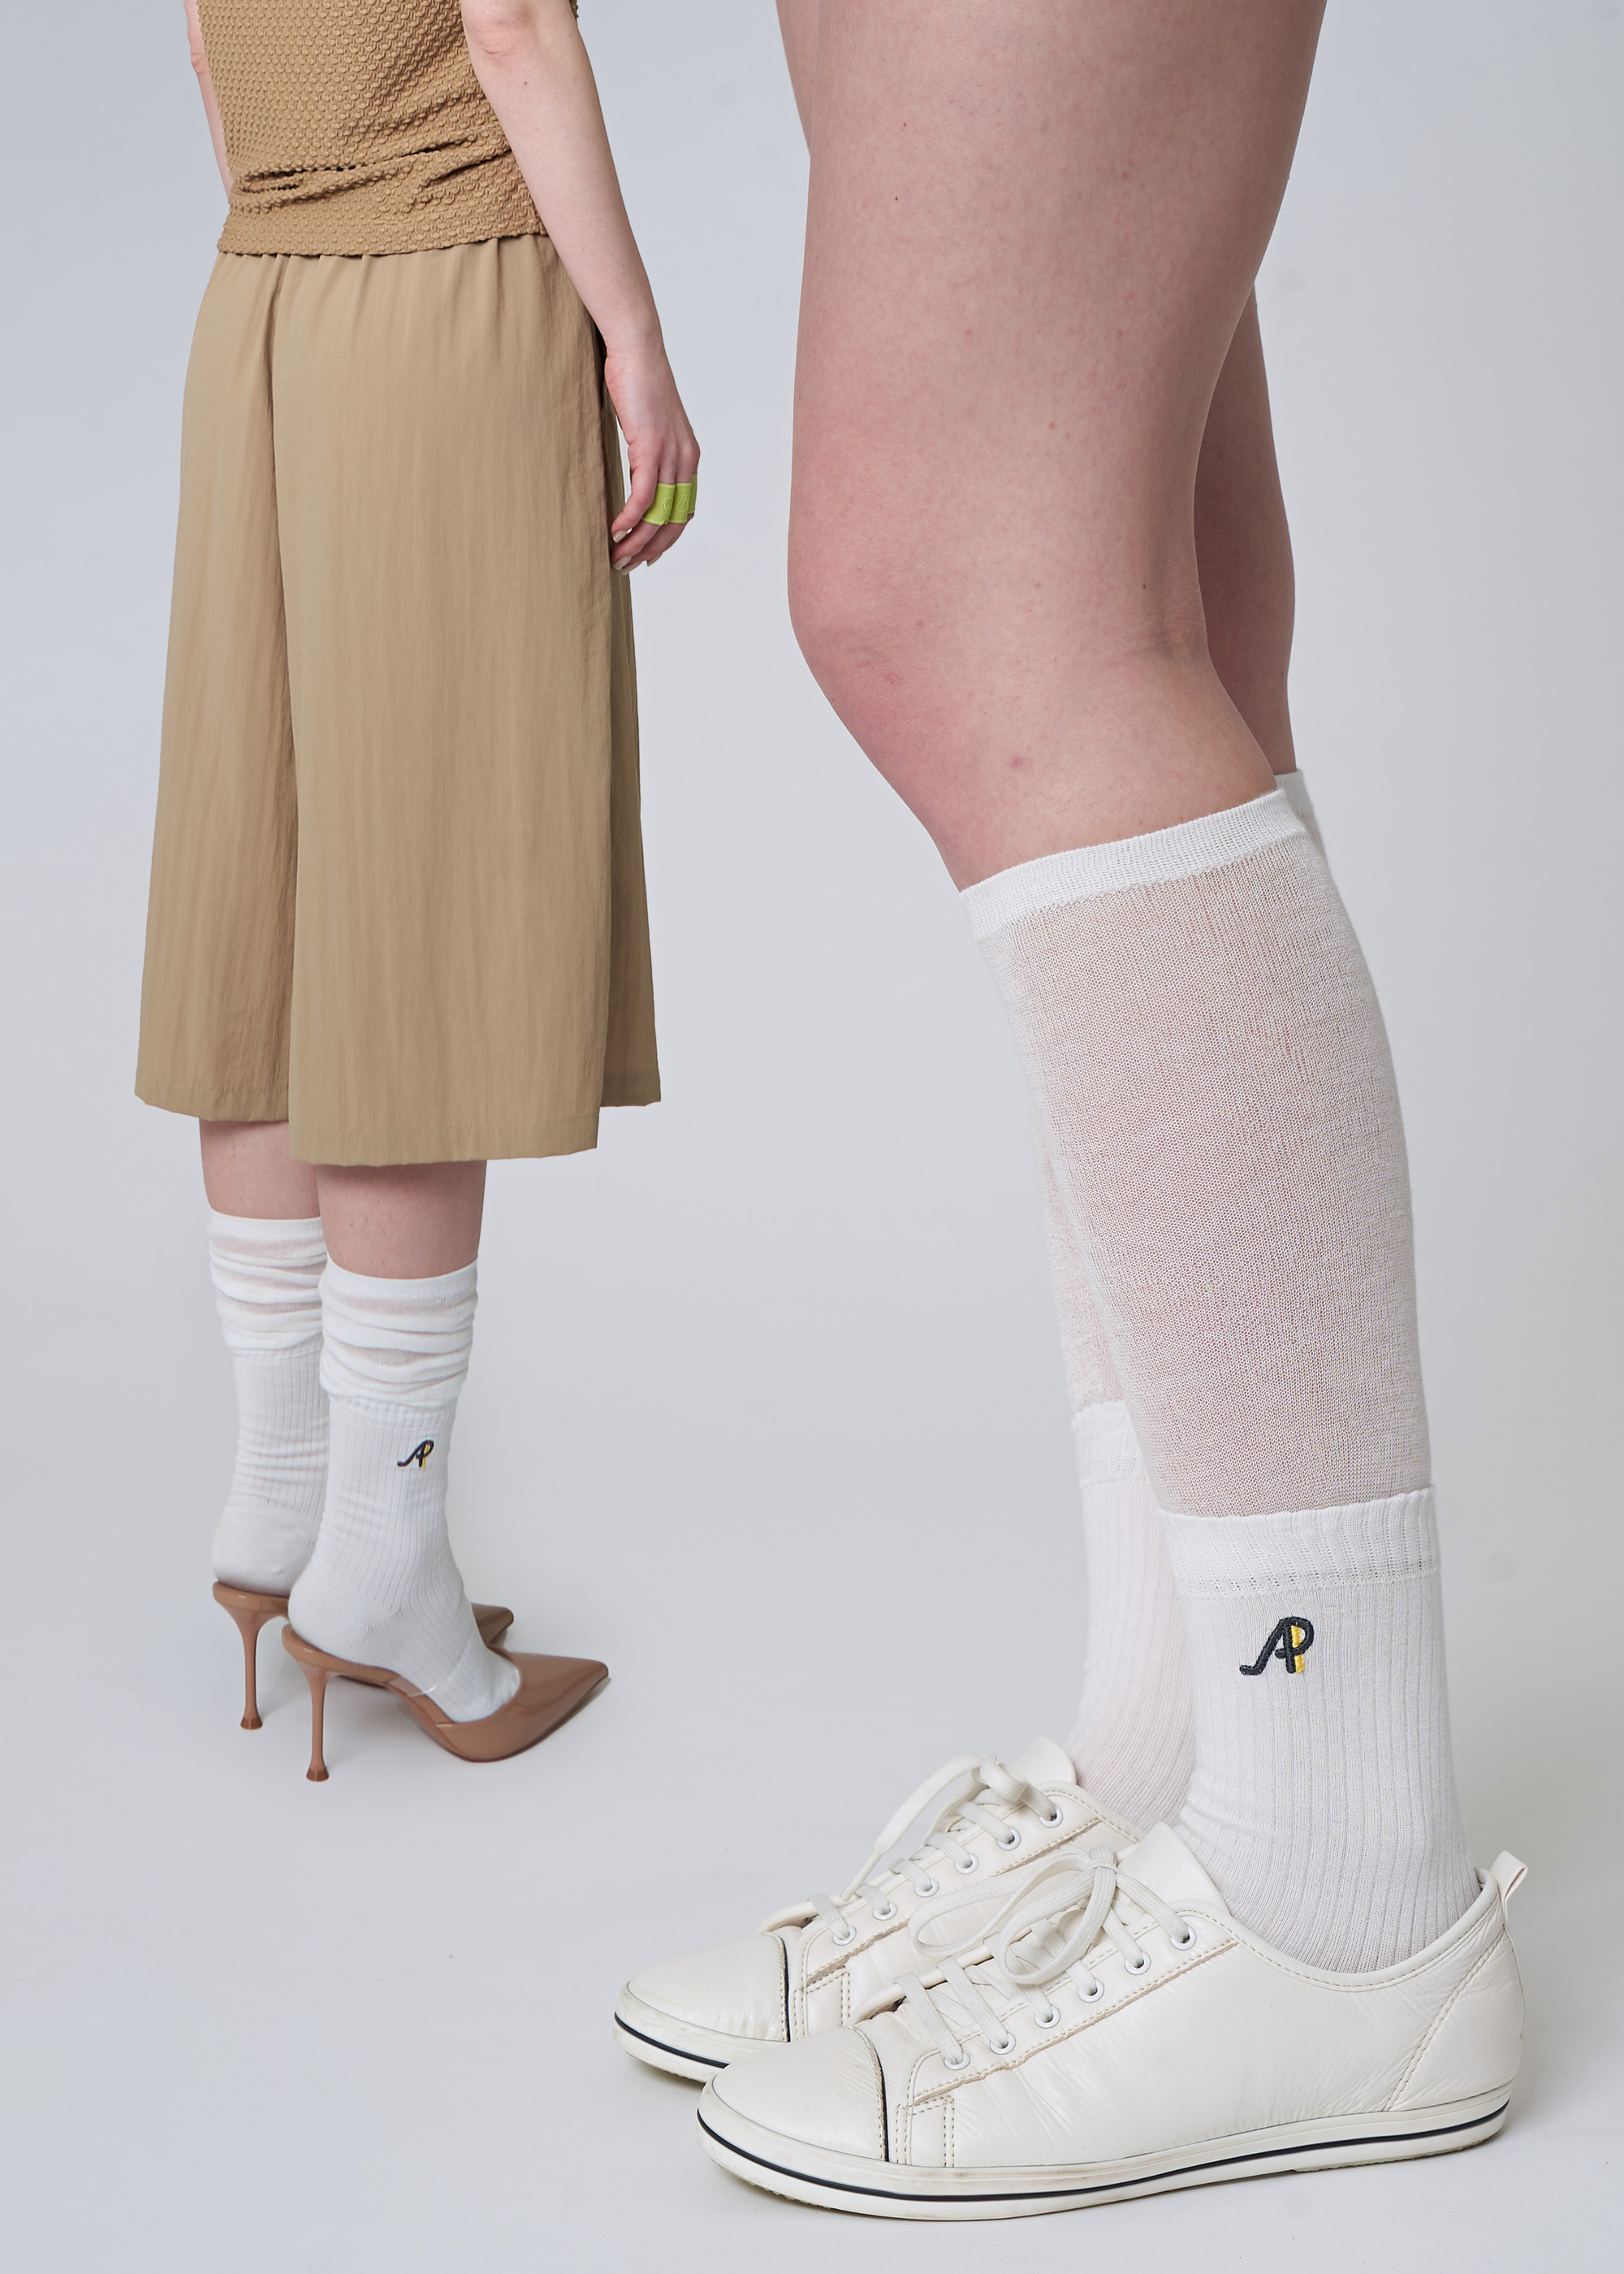 AW41AS02DOUBLE LAYER KNEE SOCKS_WHITE